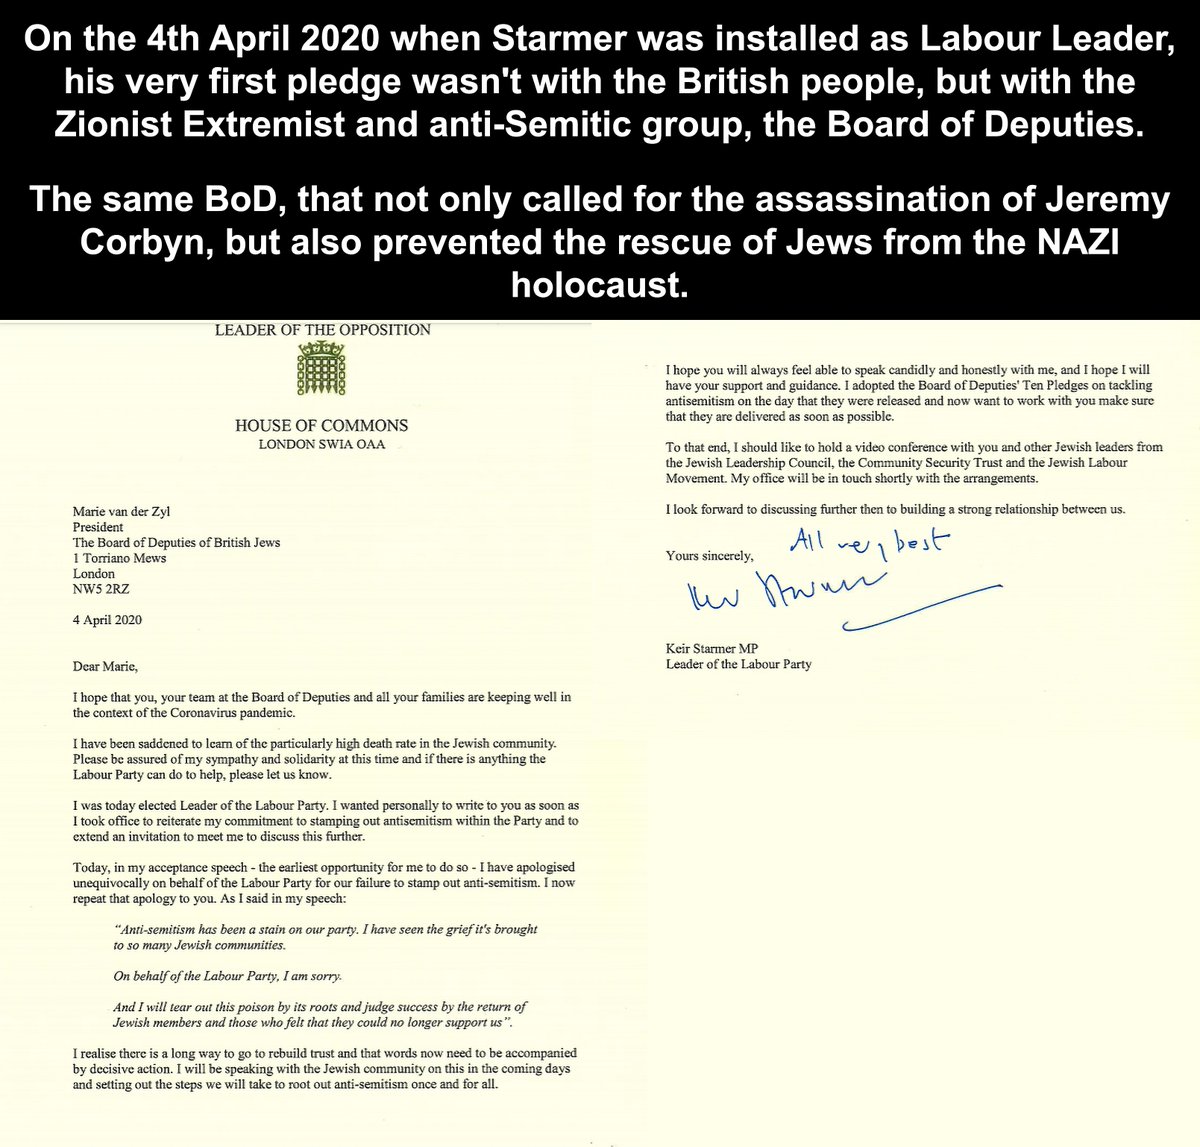 Proof that Starmer has no allegiances to the British people, but with anti-Semitic Scionist extremist group that calls for violence against politicians.